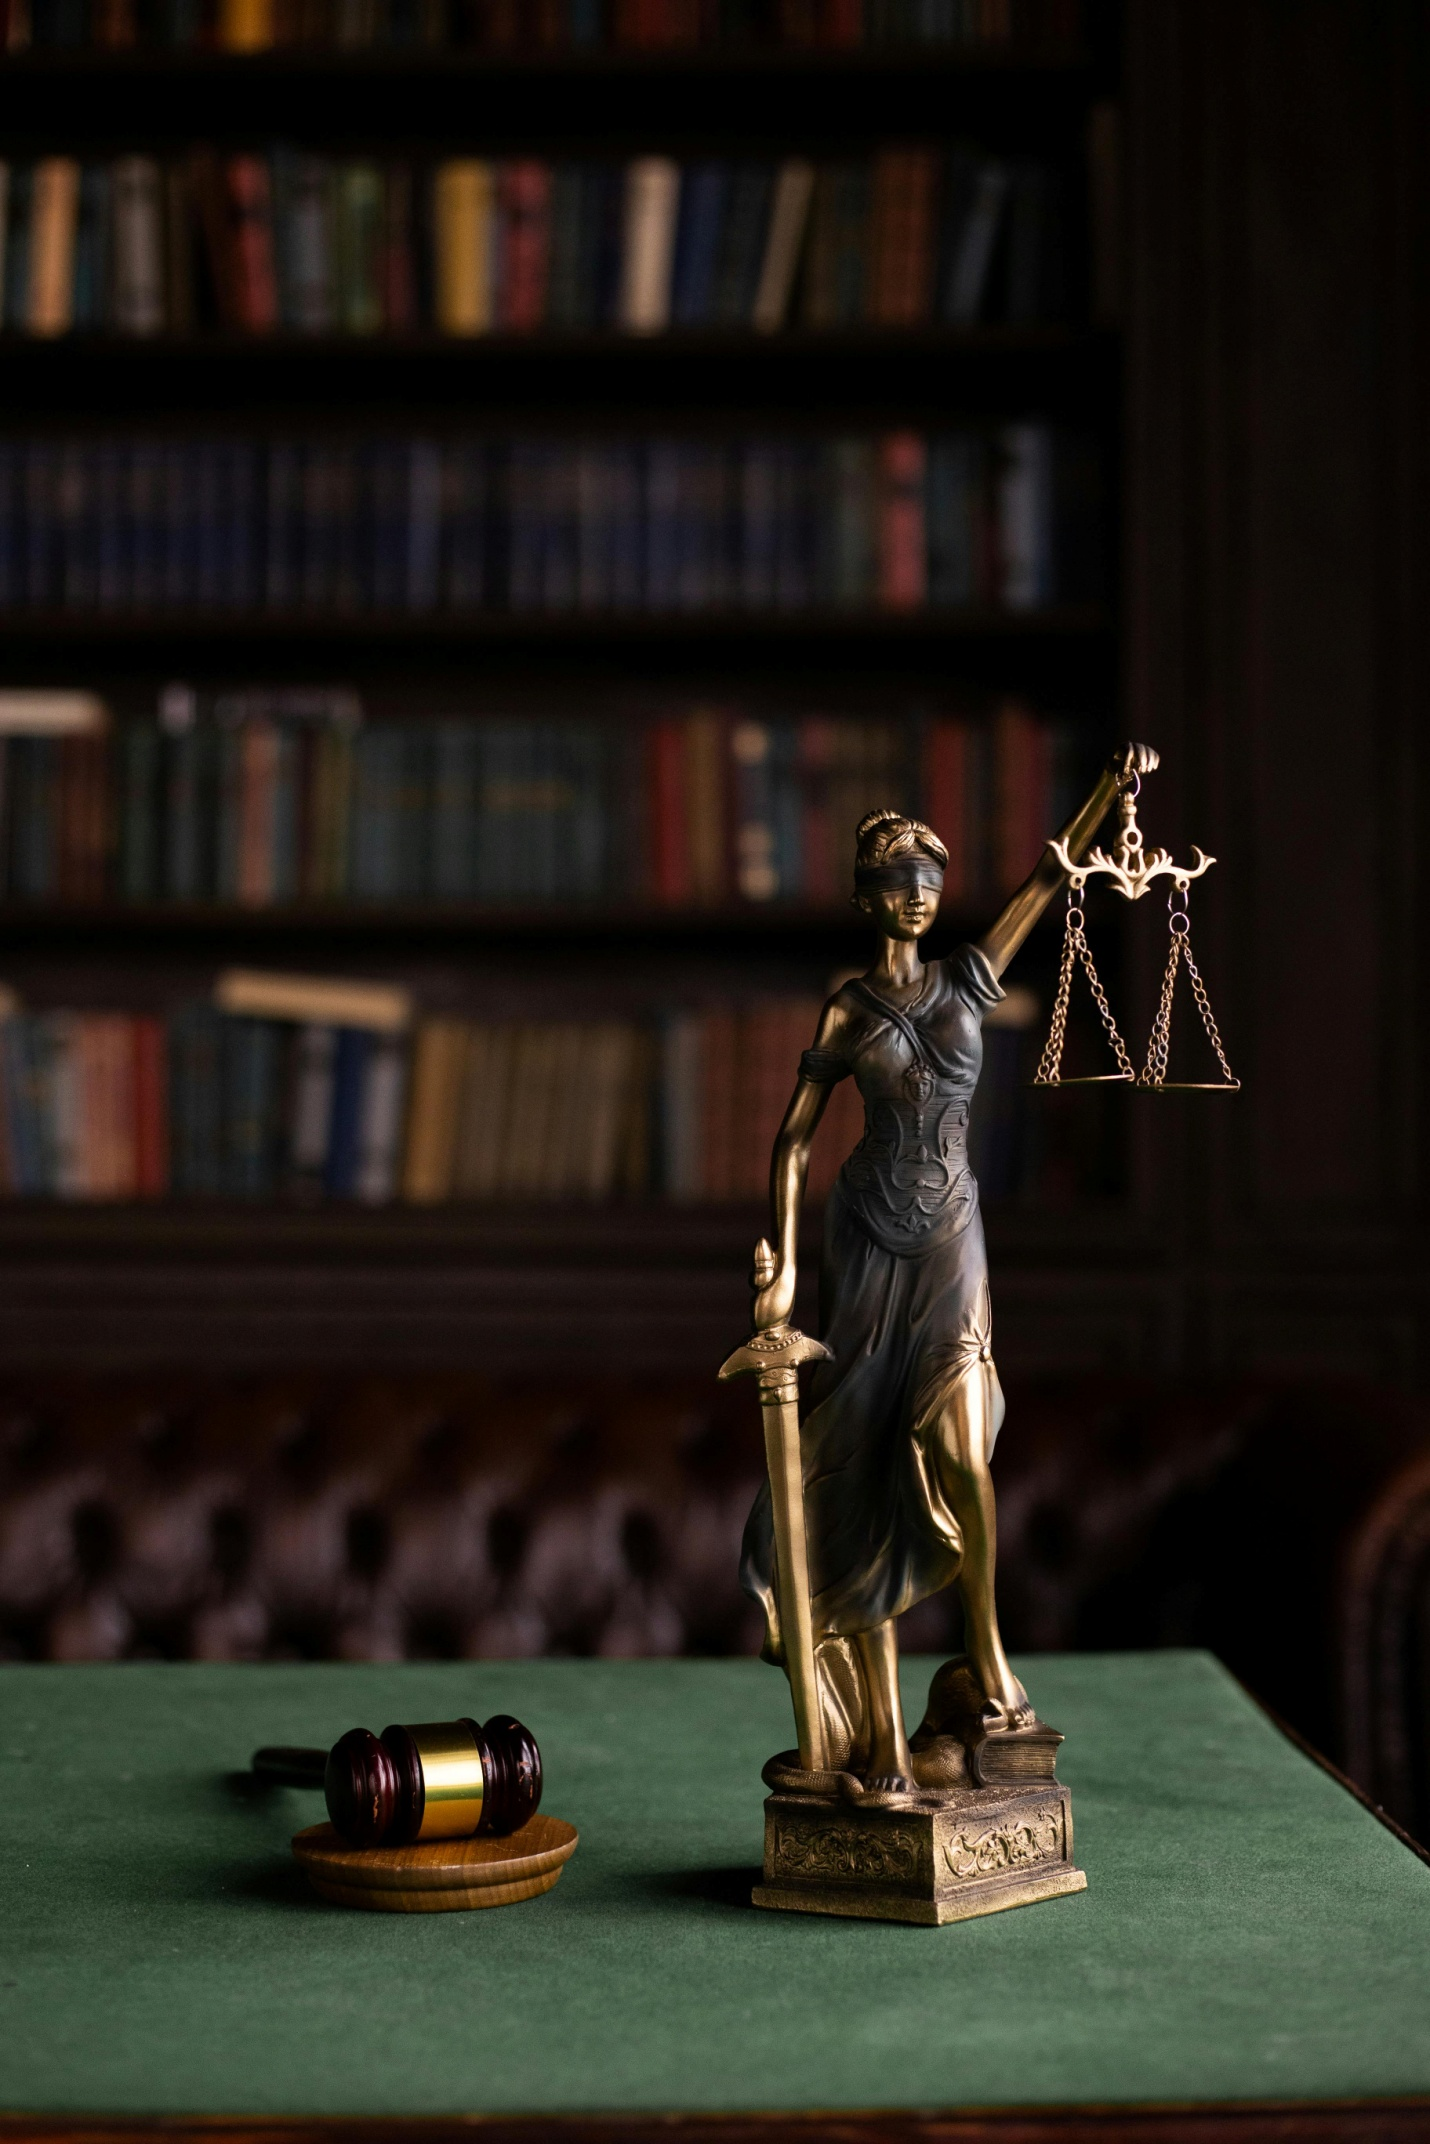 Lady justice and a wooden gavel on a table